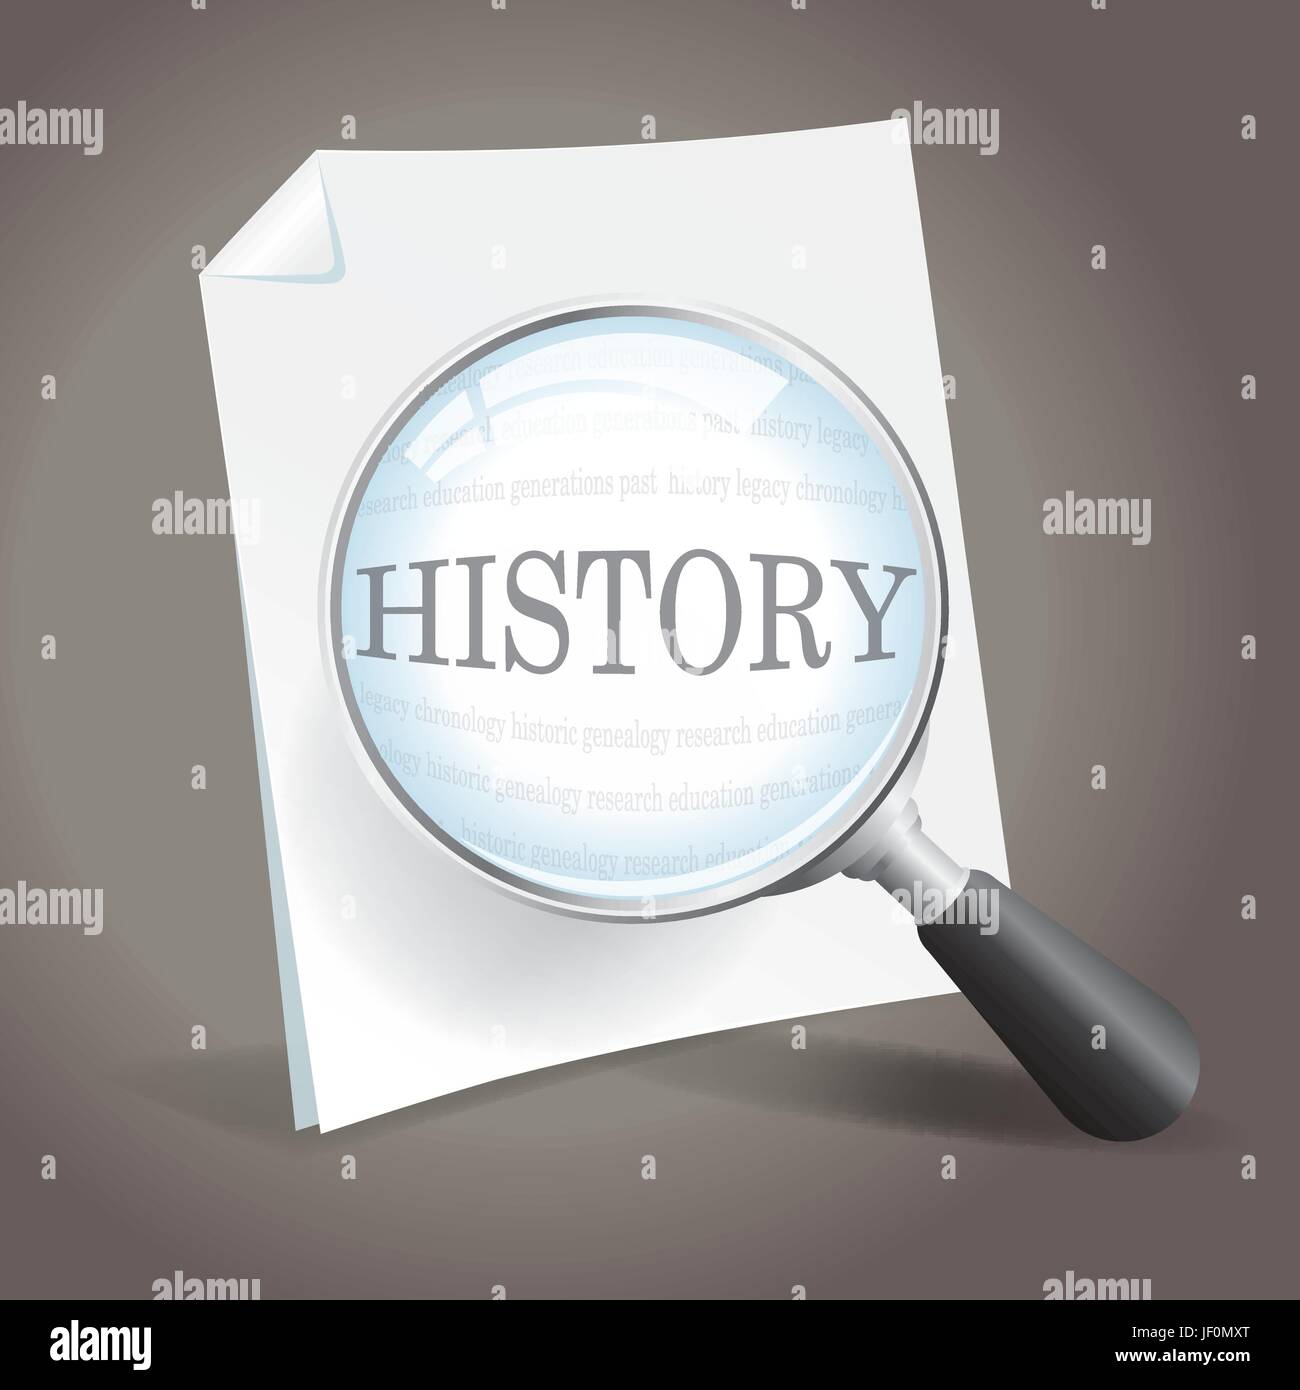 education, historical, research, vintage, illustration, past, history, Stock Vector